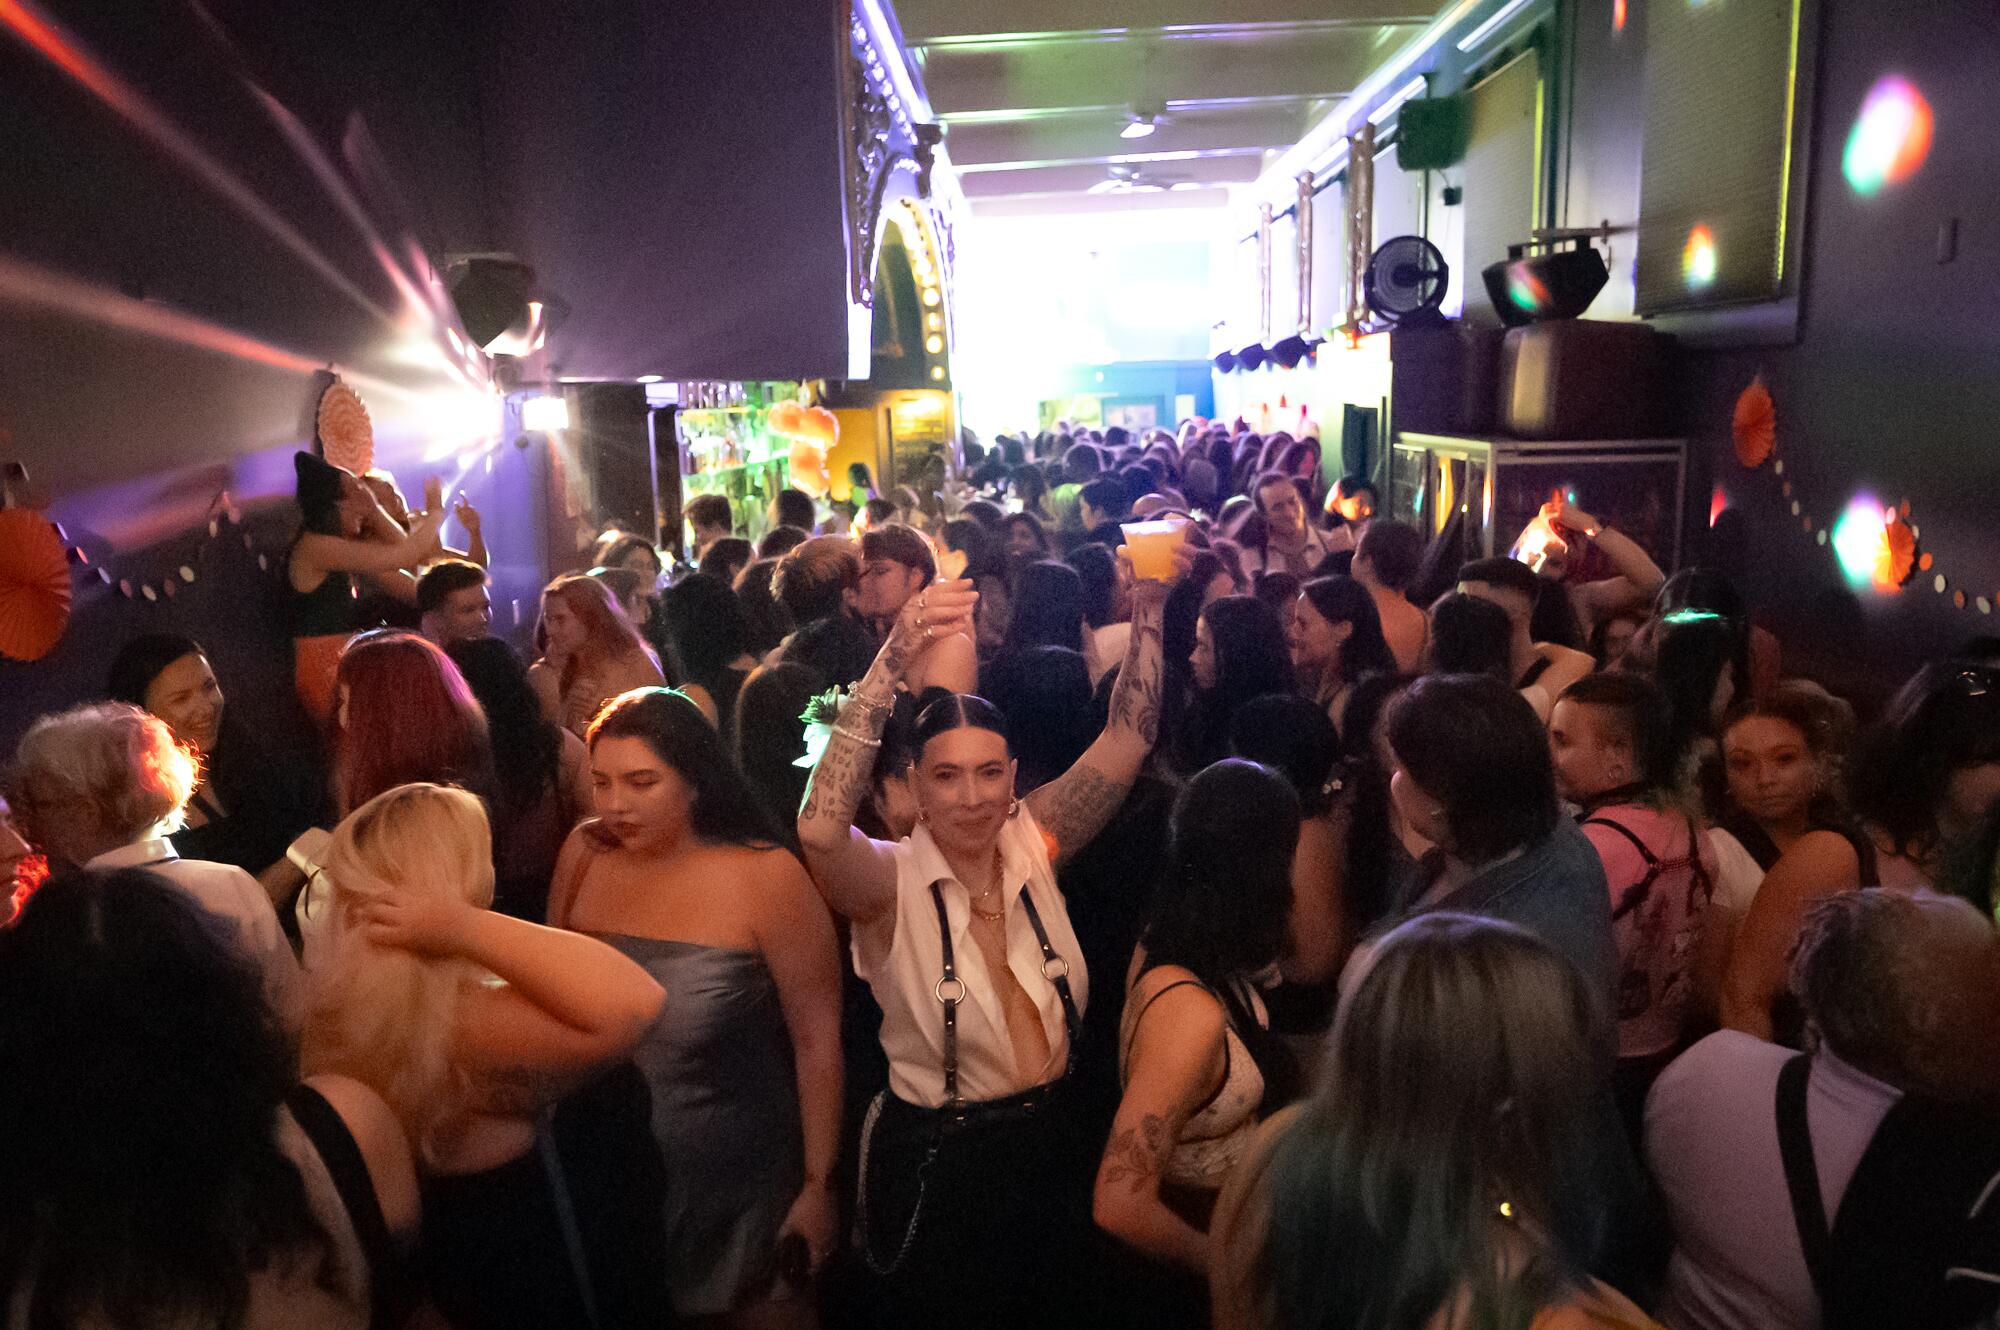 Bartender Amanda Harris cuts through the crowd to deliver a drink during Queer Prom night.